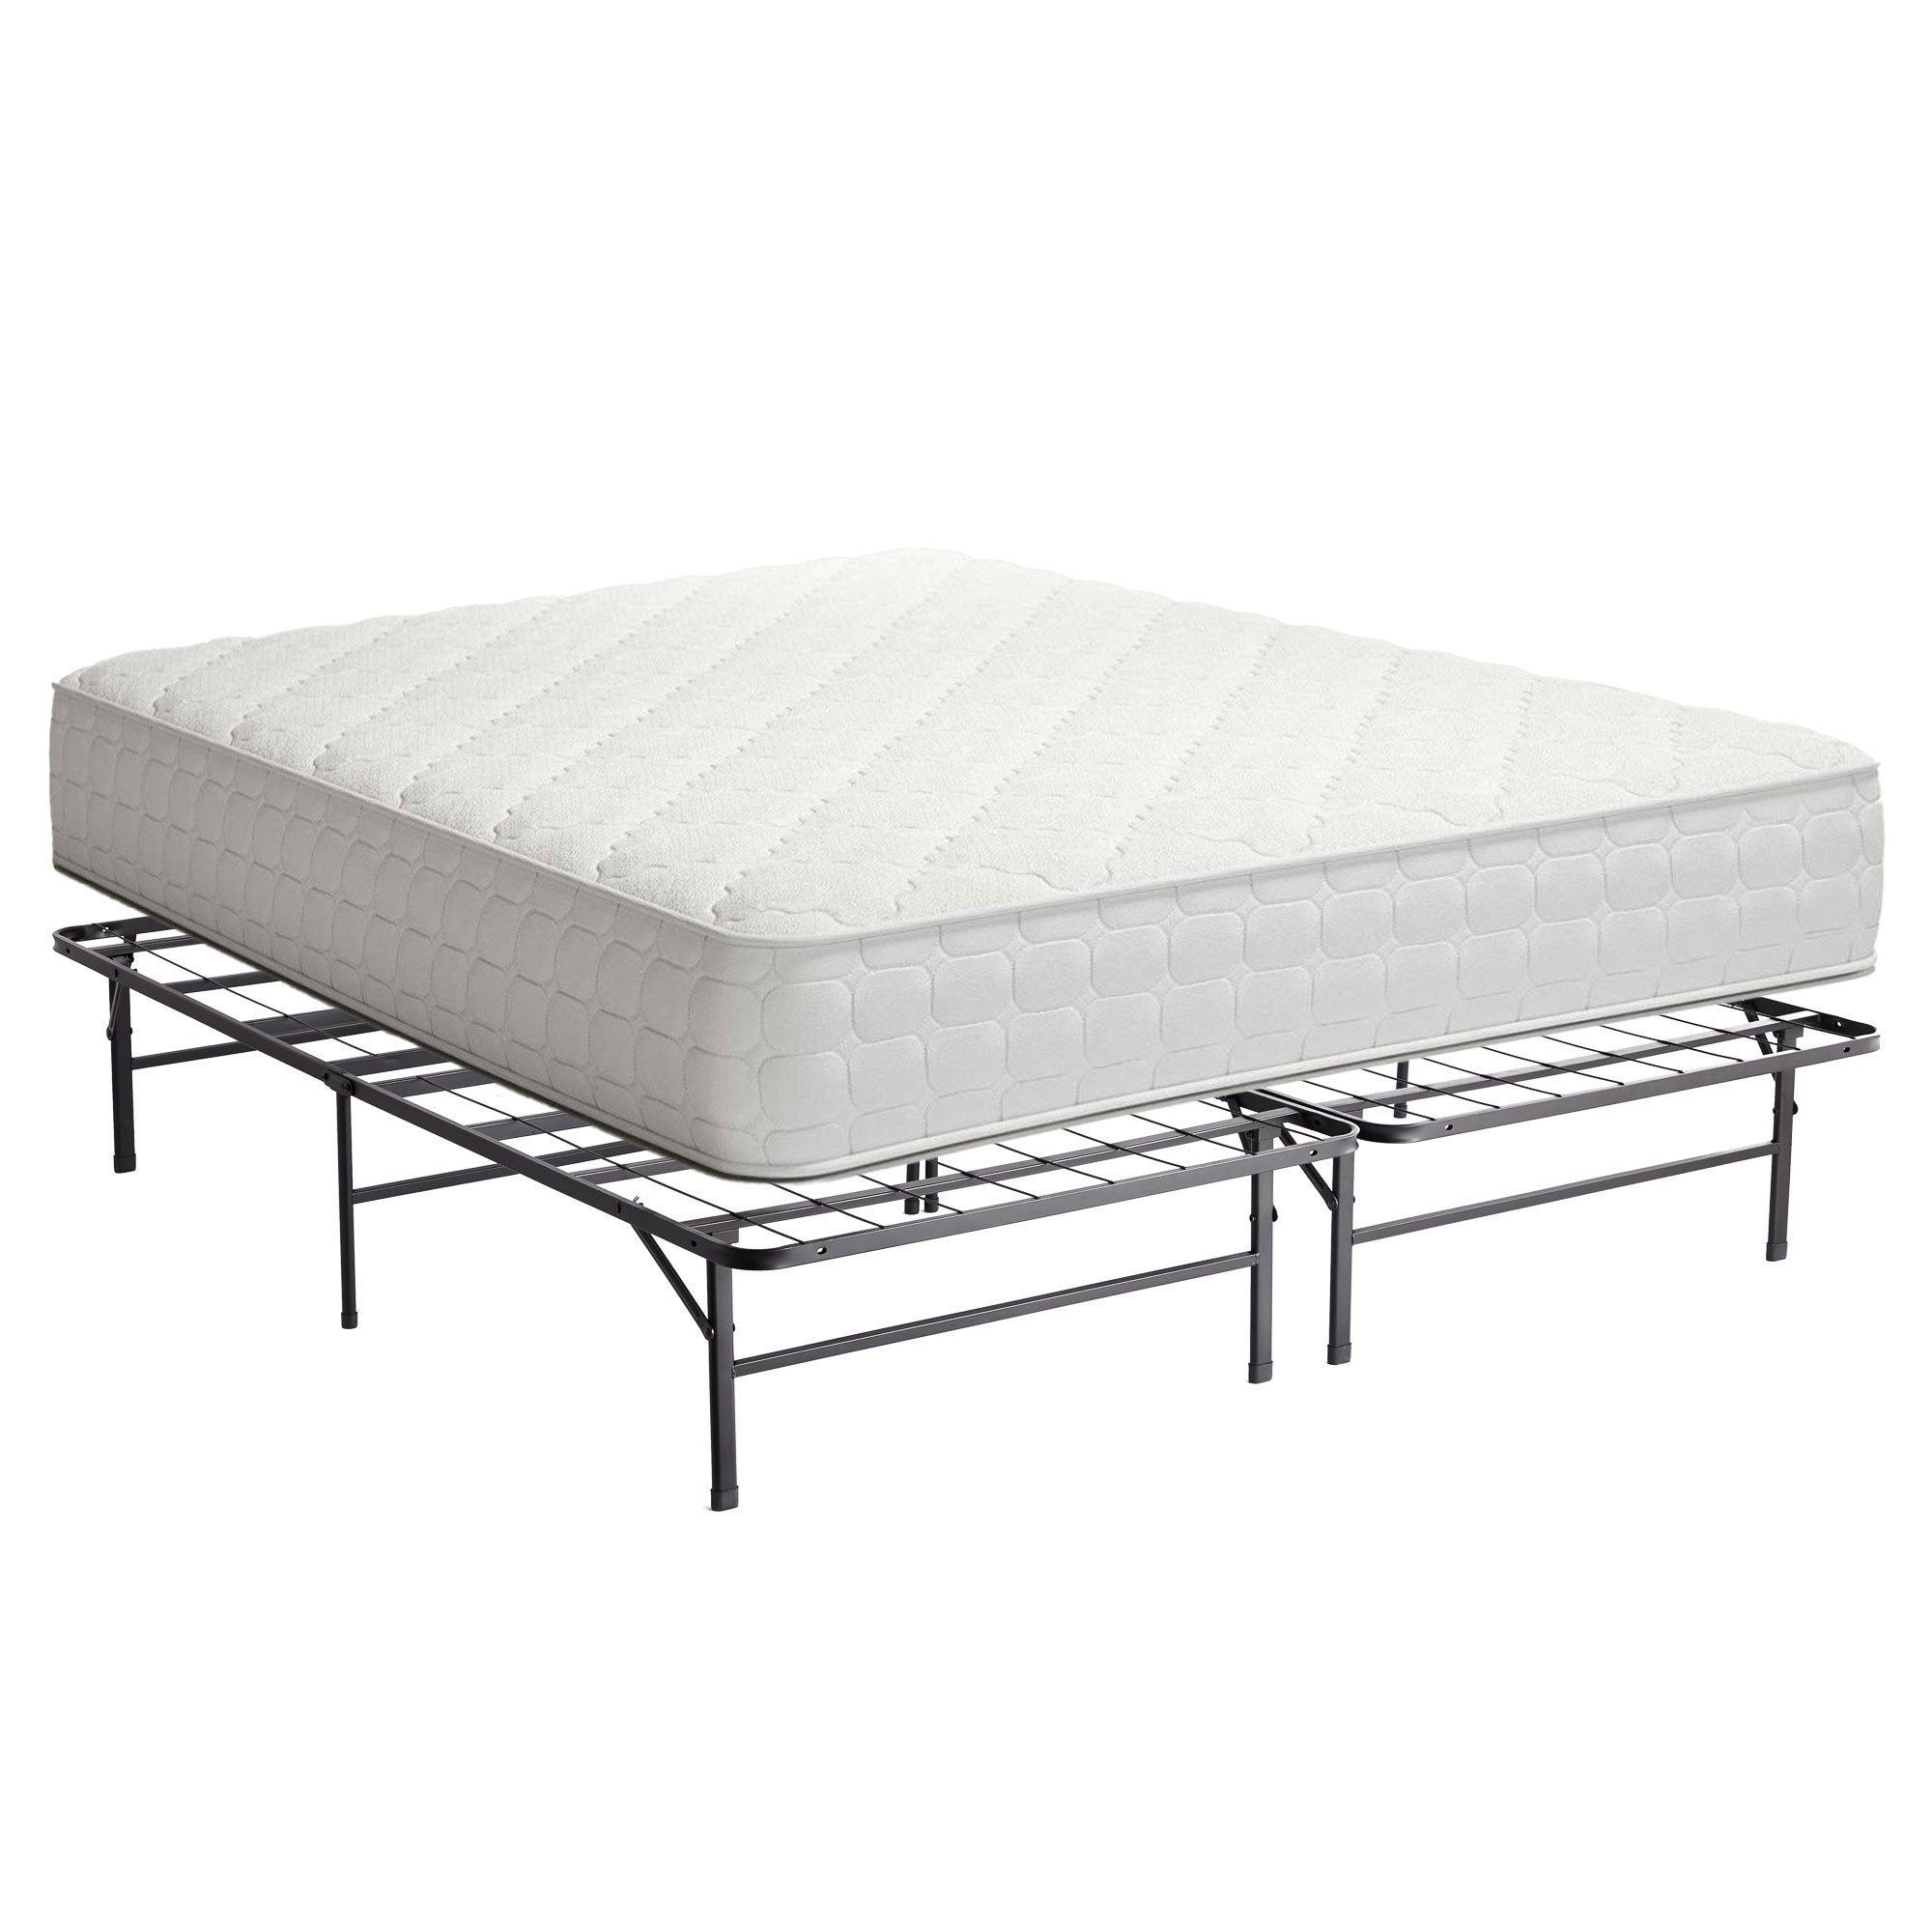 [NYC Deal] 9 Inch Firm Mattress with Metal Bed Frame & Delivery in NYC